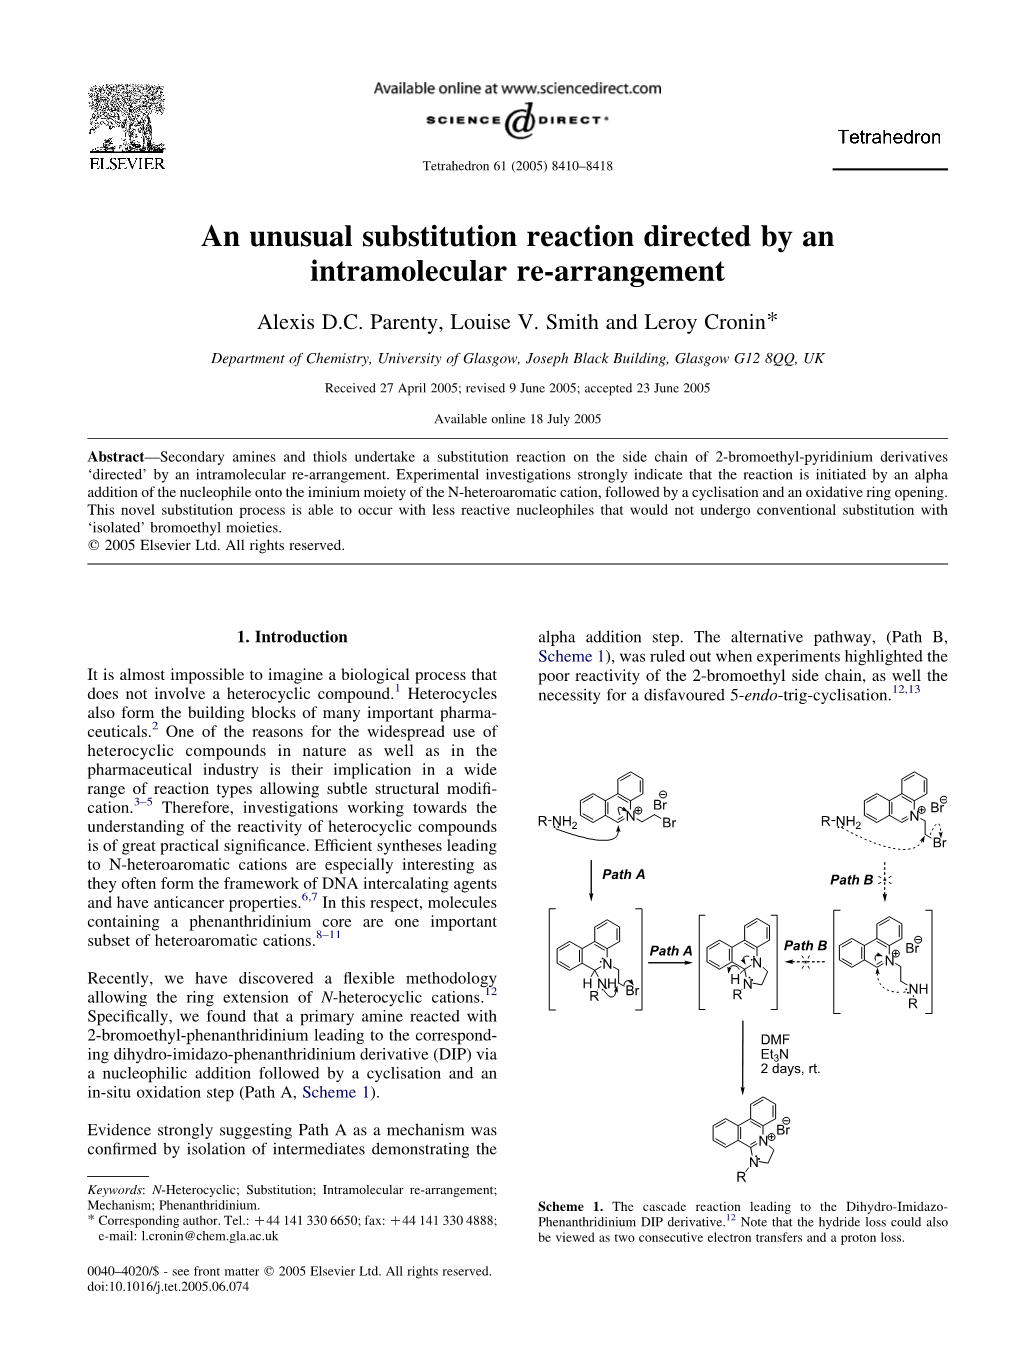 An Unusual Substitution Reaction Directed by an Intramolecular Re-Arrangement